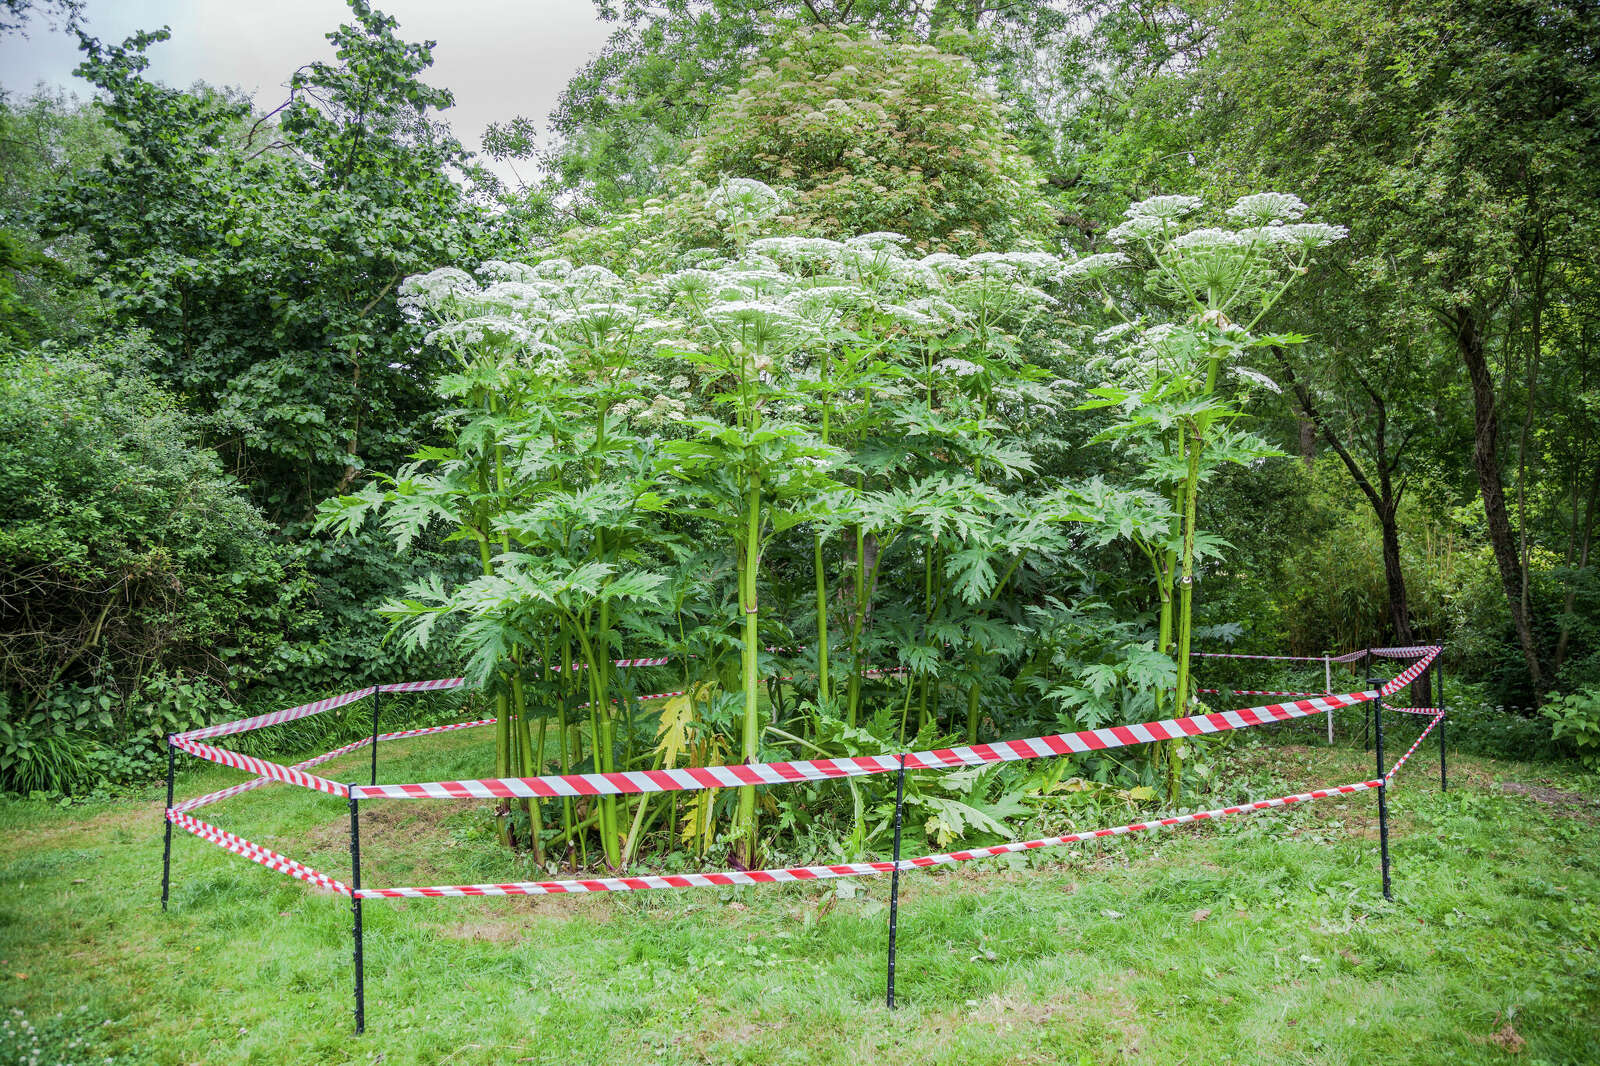 An image of giant hogweed.